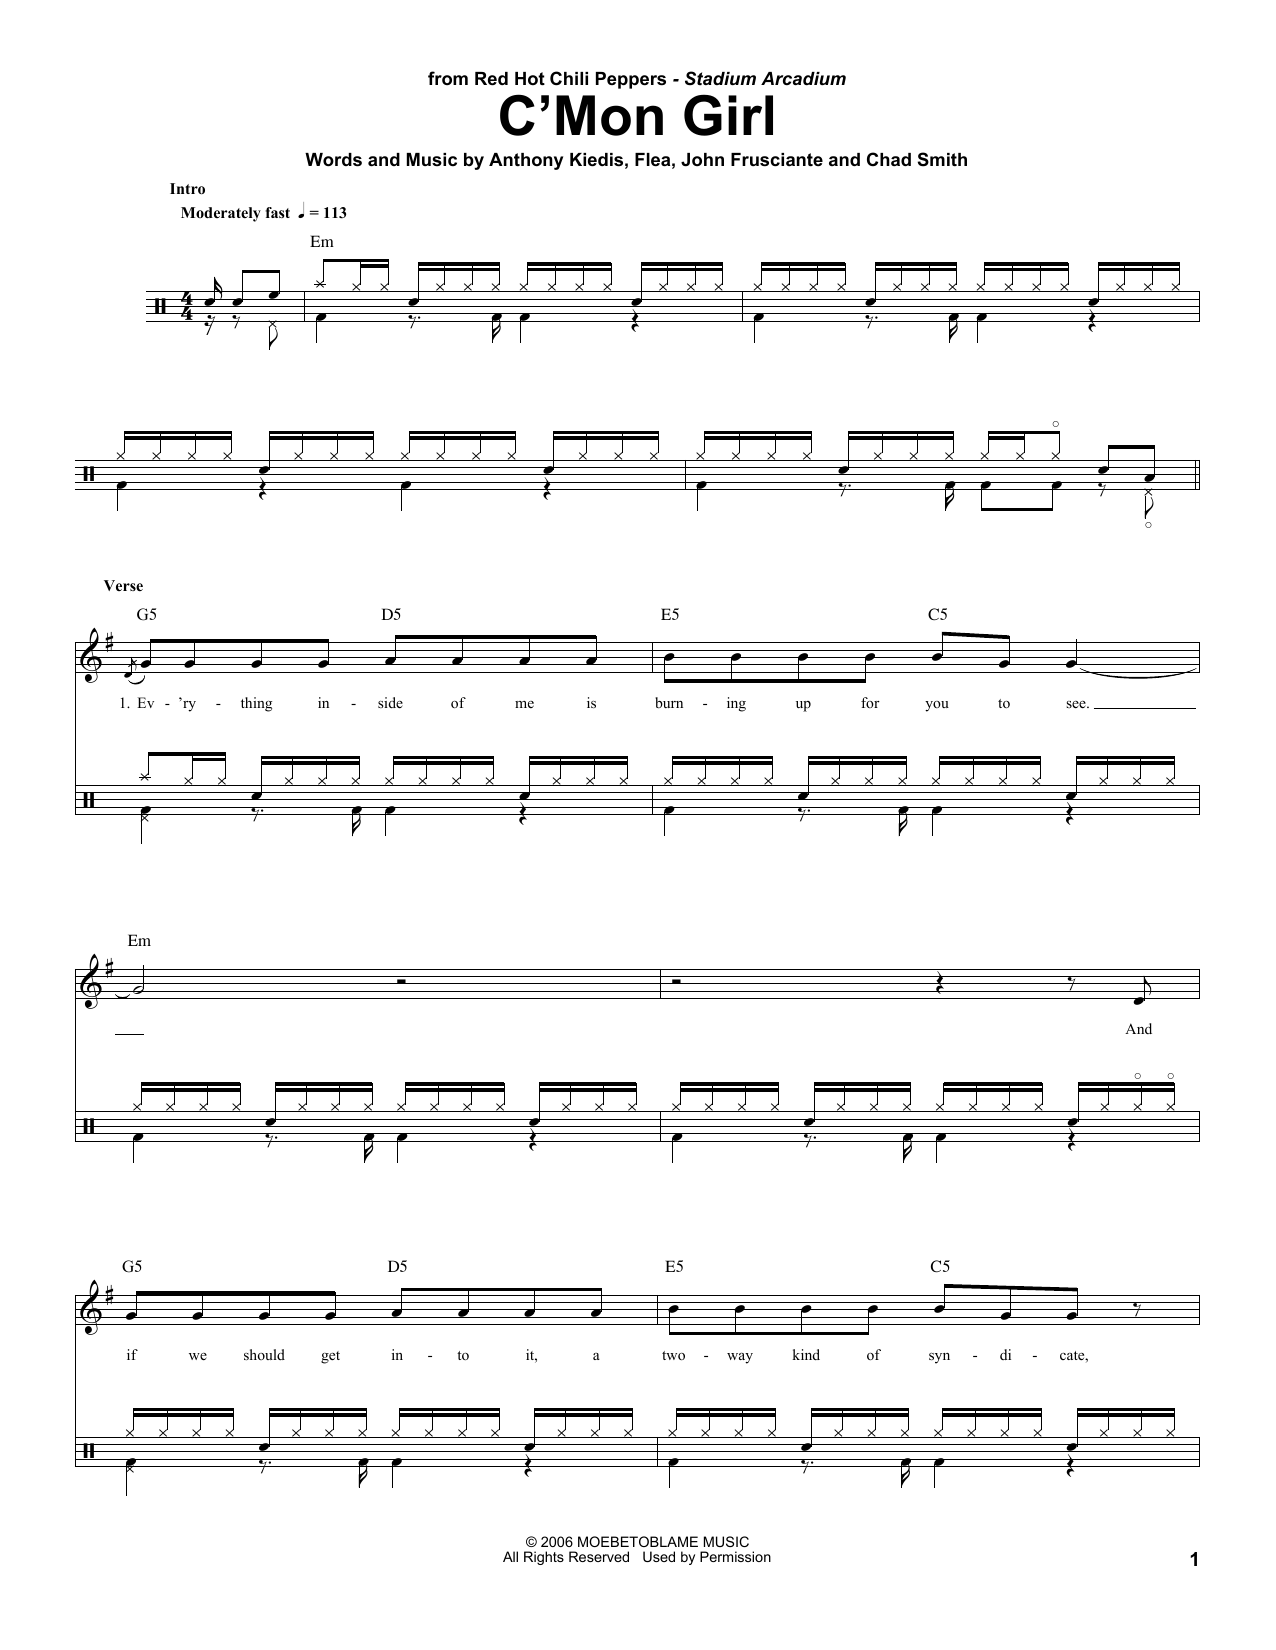 Download Red Hot Chili Peppers C'Mon Girl Sheet Music